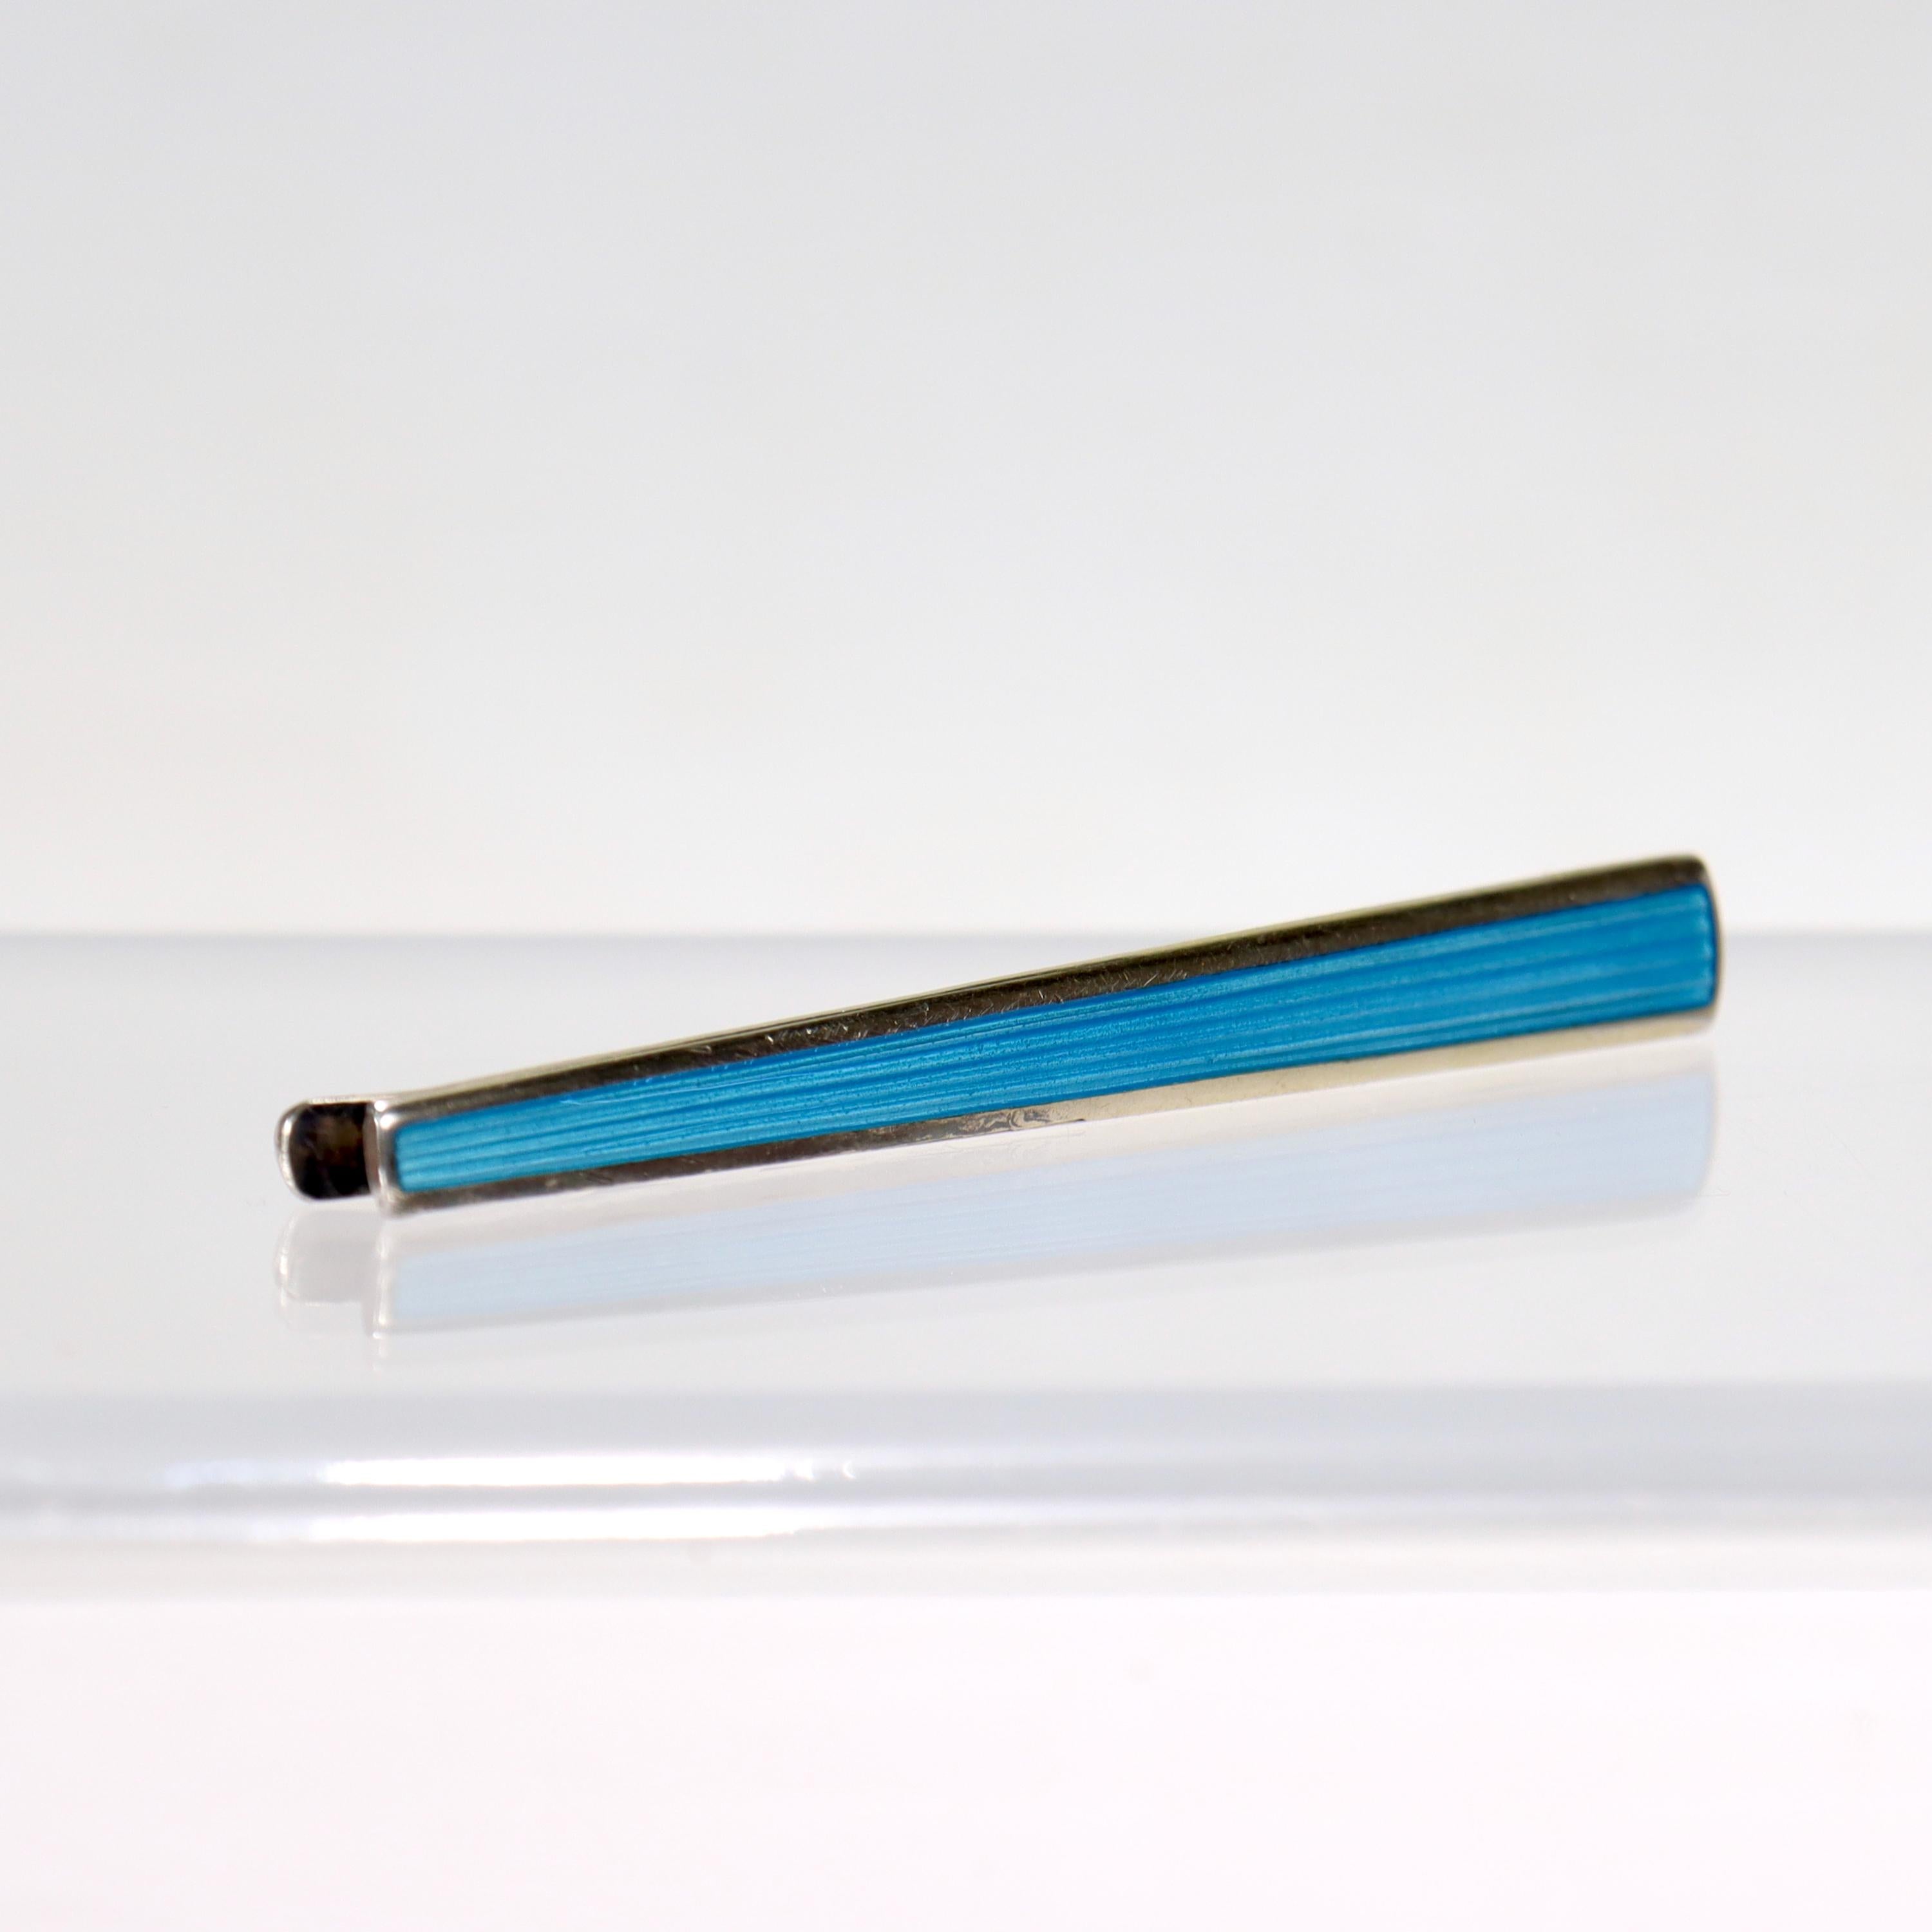 A very fine vintage Norwegian tie bar.

In 830 silver with blue guilloche enamel.

Simply a lovely Mid-Century modern tie bar!

Date:
Mid-20th Century

Overall Condition:
It is in overall good, as-pictured, used estate condition with some fine &